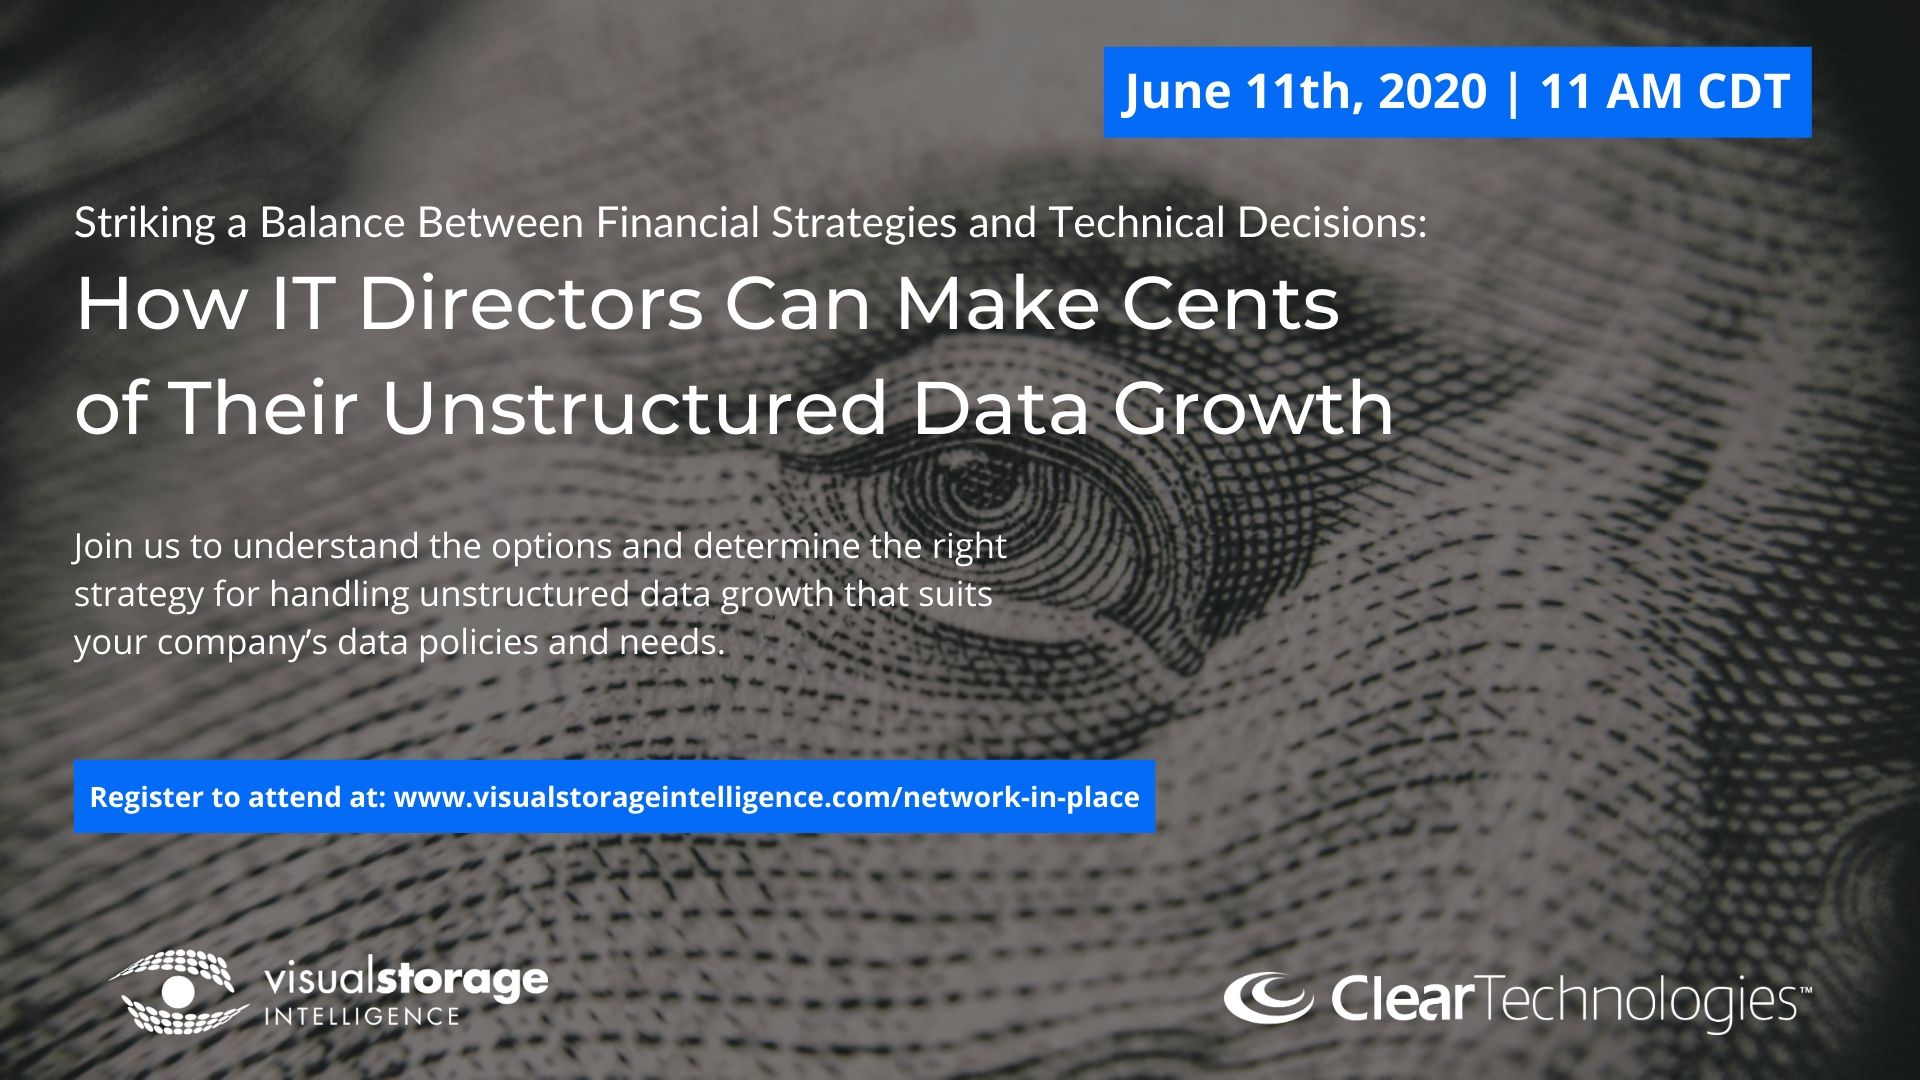 Promotional event photo - "How IT directors can make cents of their unstructured data growth" - Date: June 11th, 2020 @ 11AM CDT